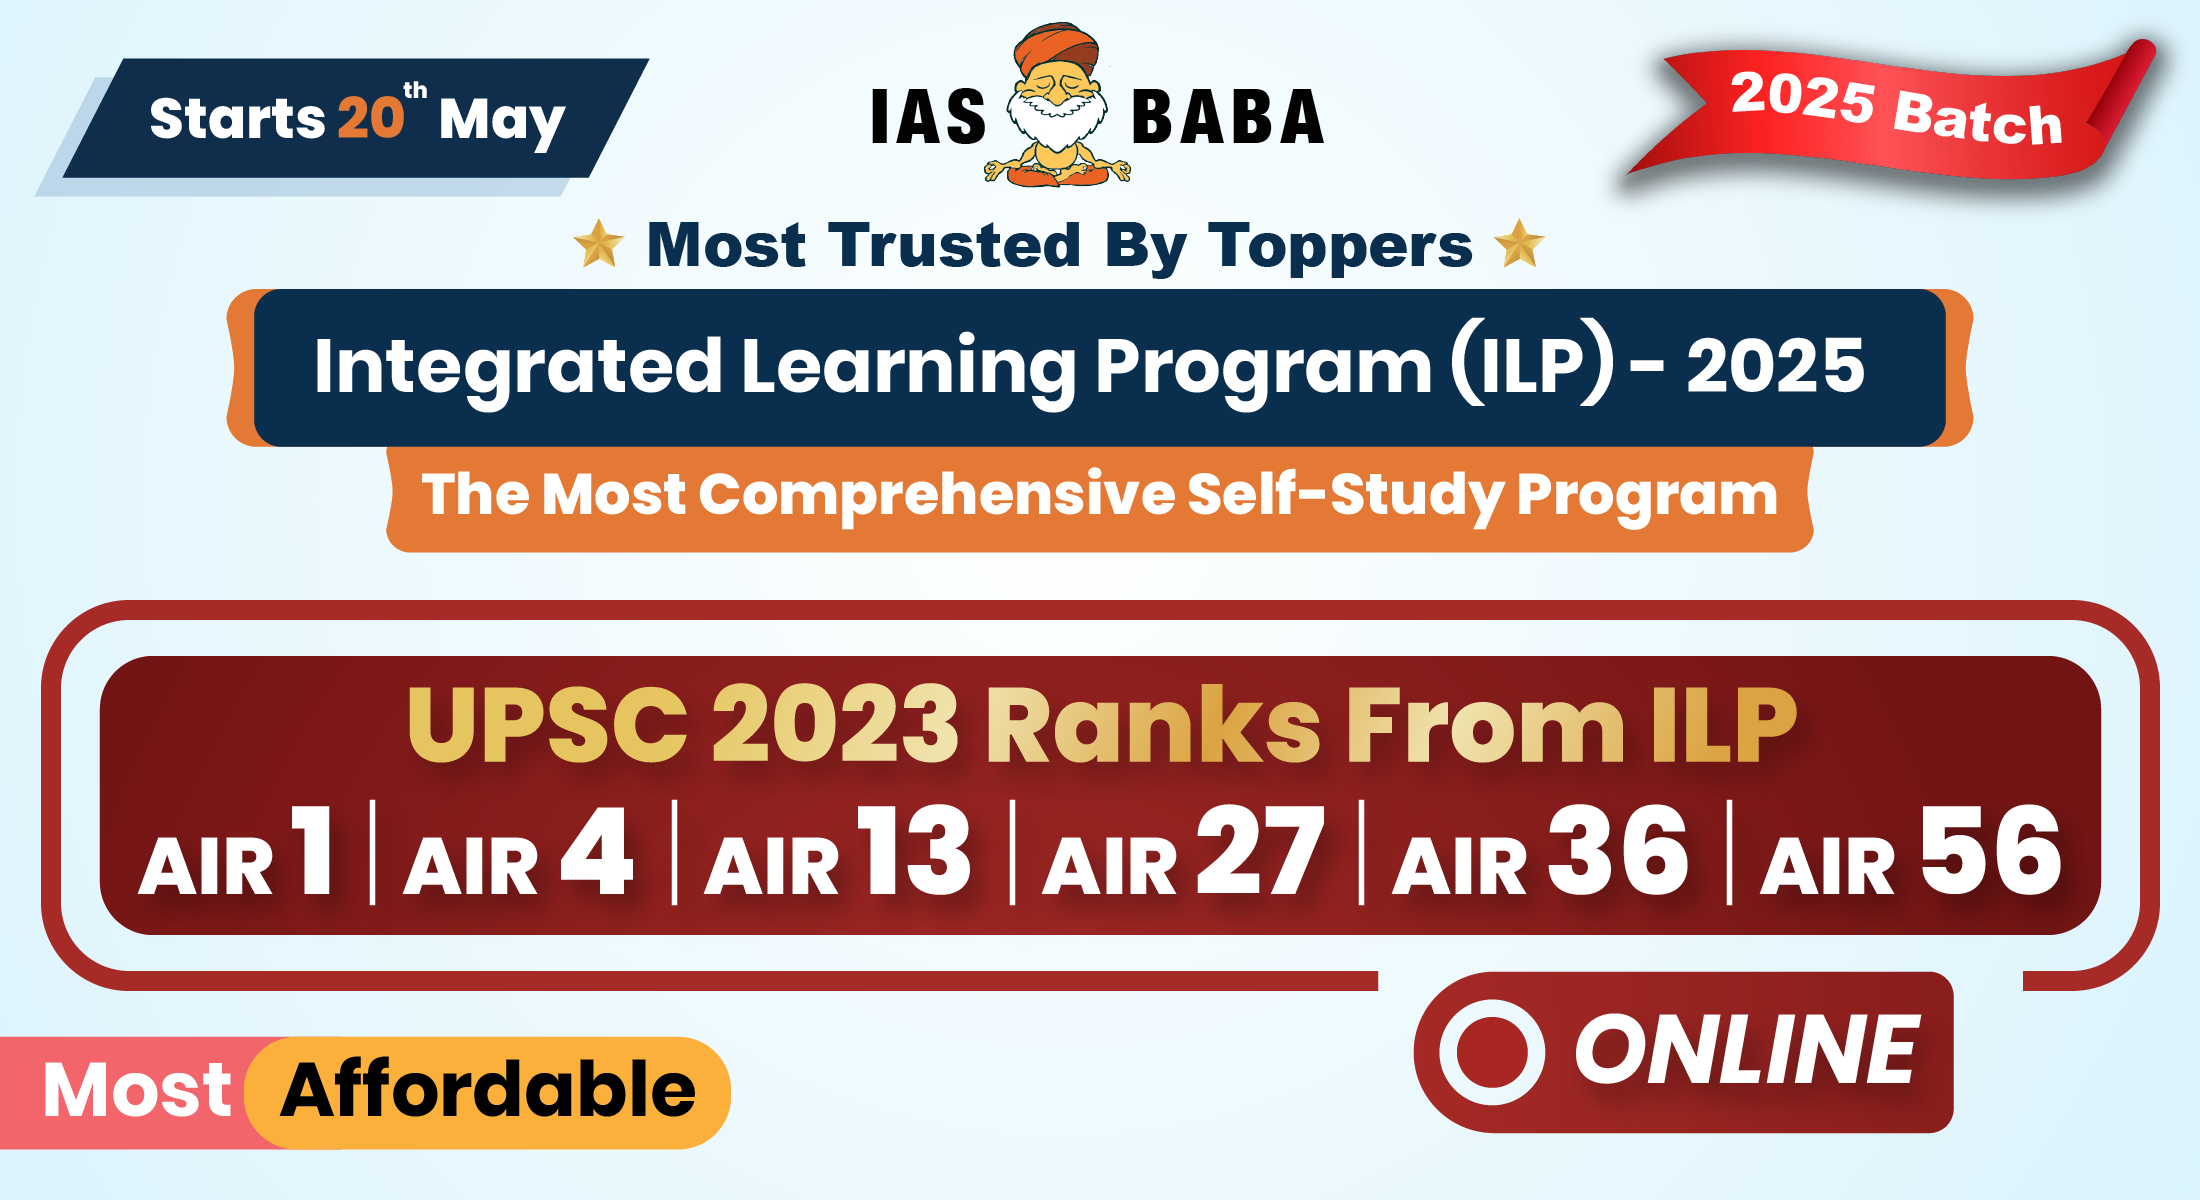 Integrated Learning Programme - ILP 2025